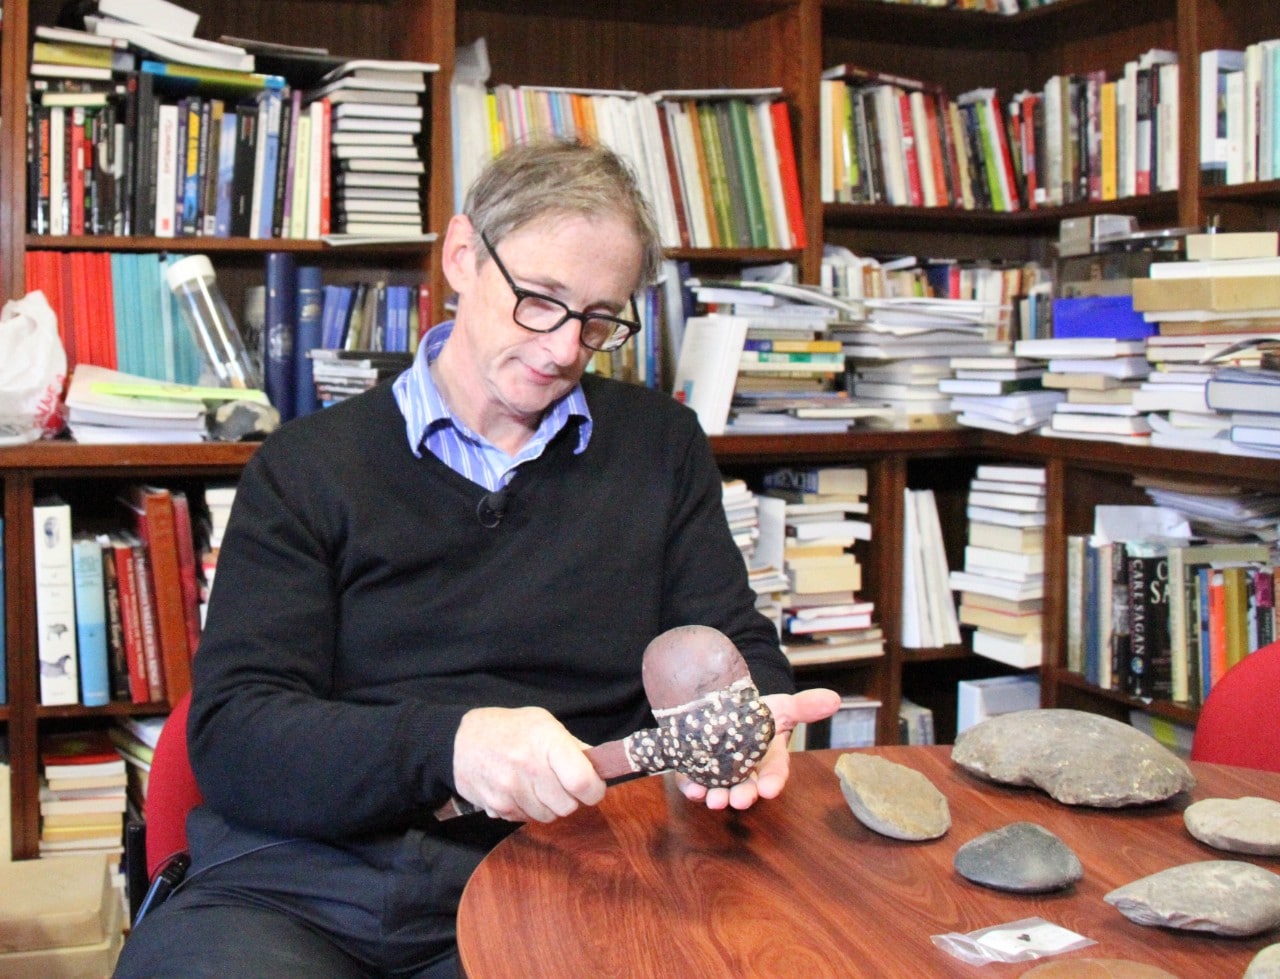 Professor Peter Hiscock with a hafted axe, indicative of the kind the fragment came from.